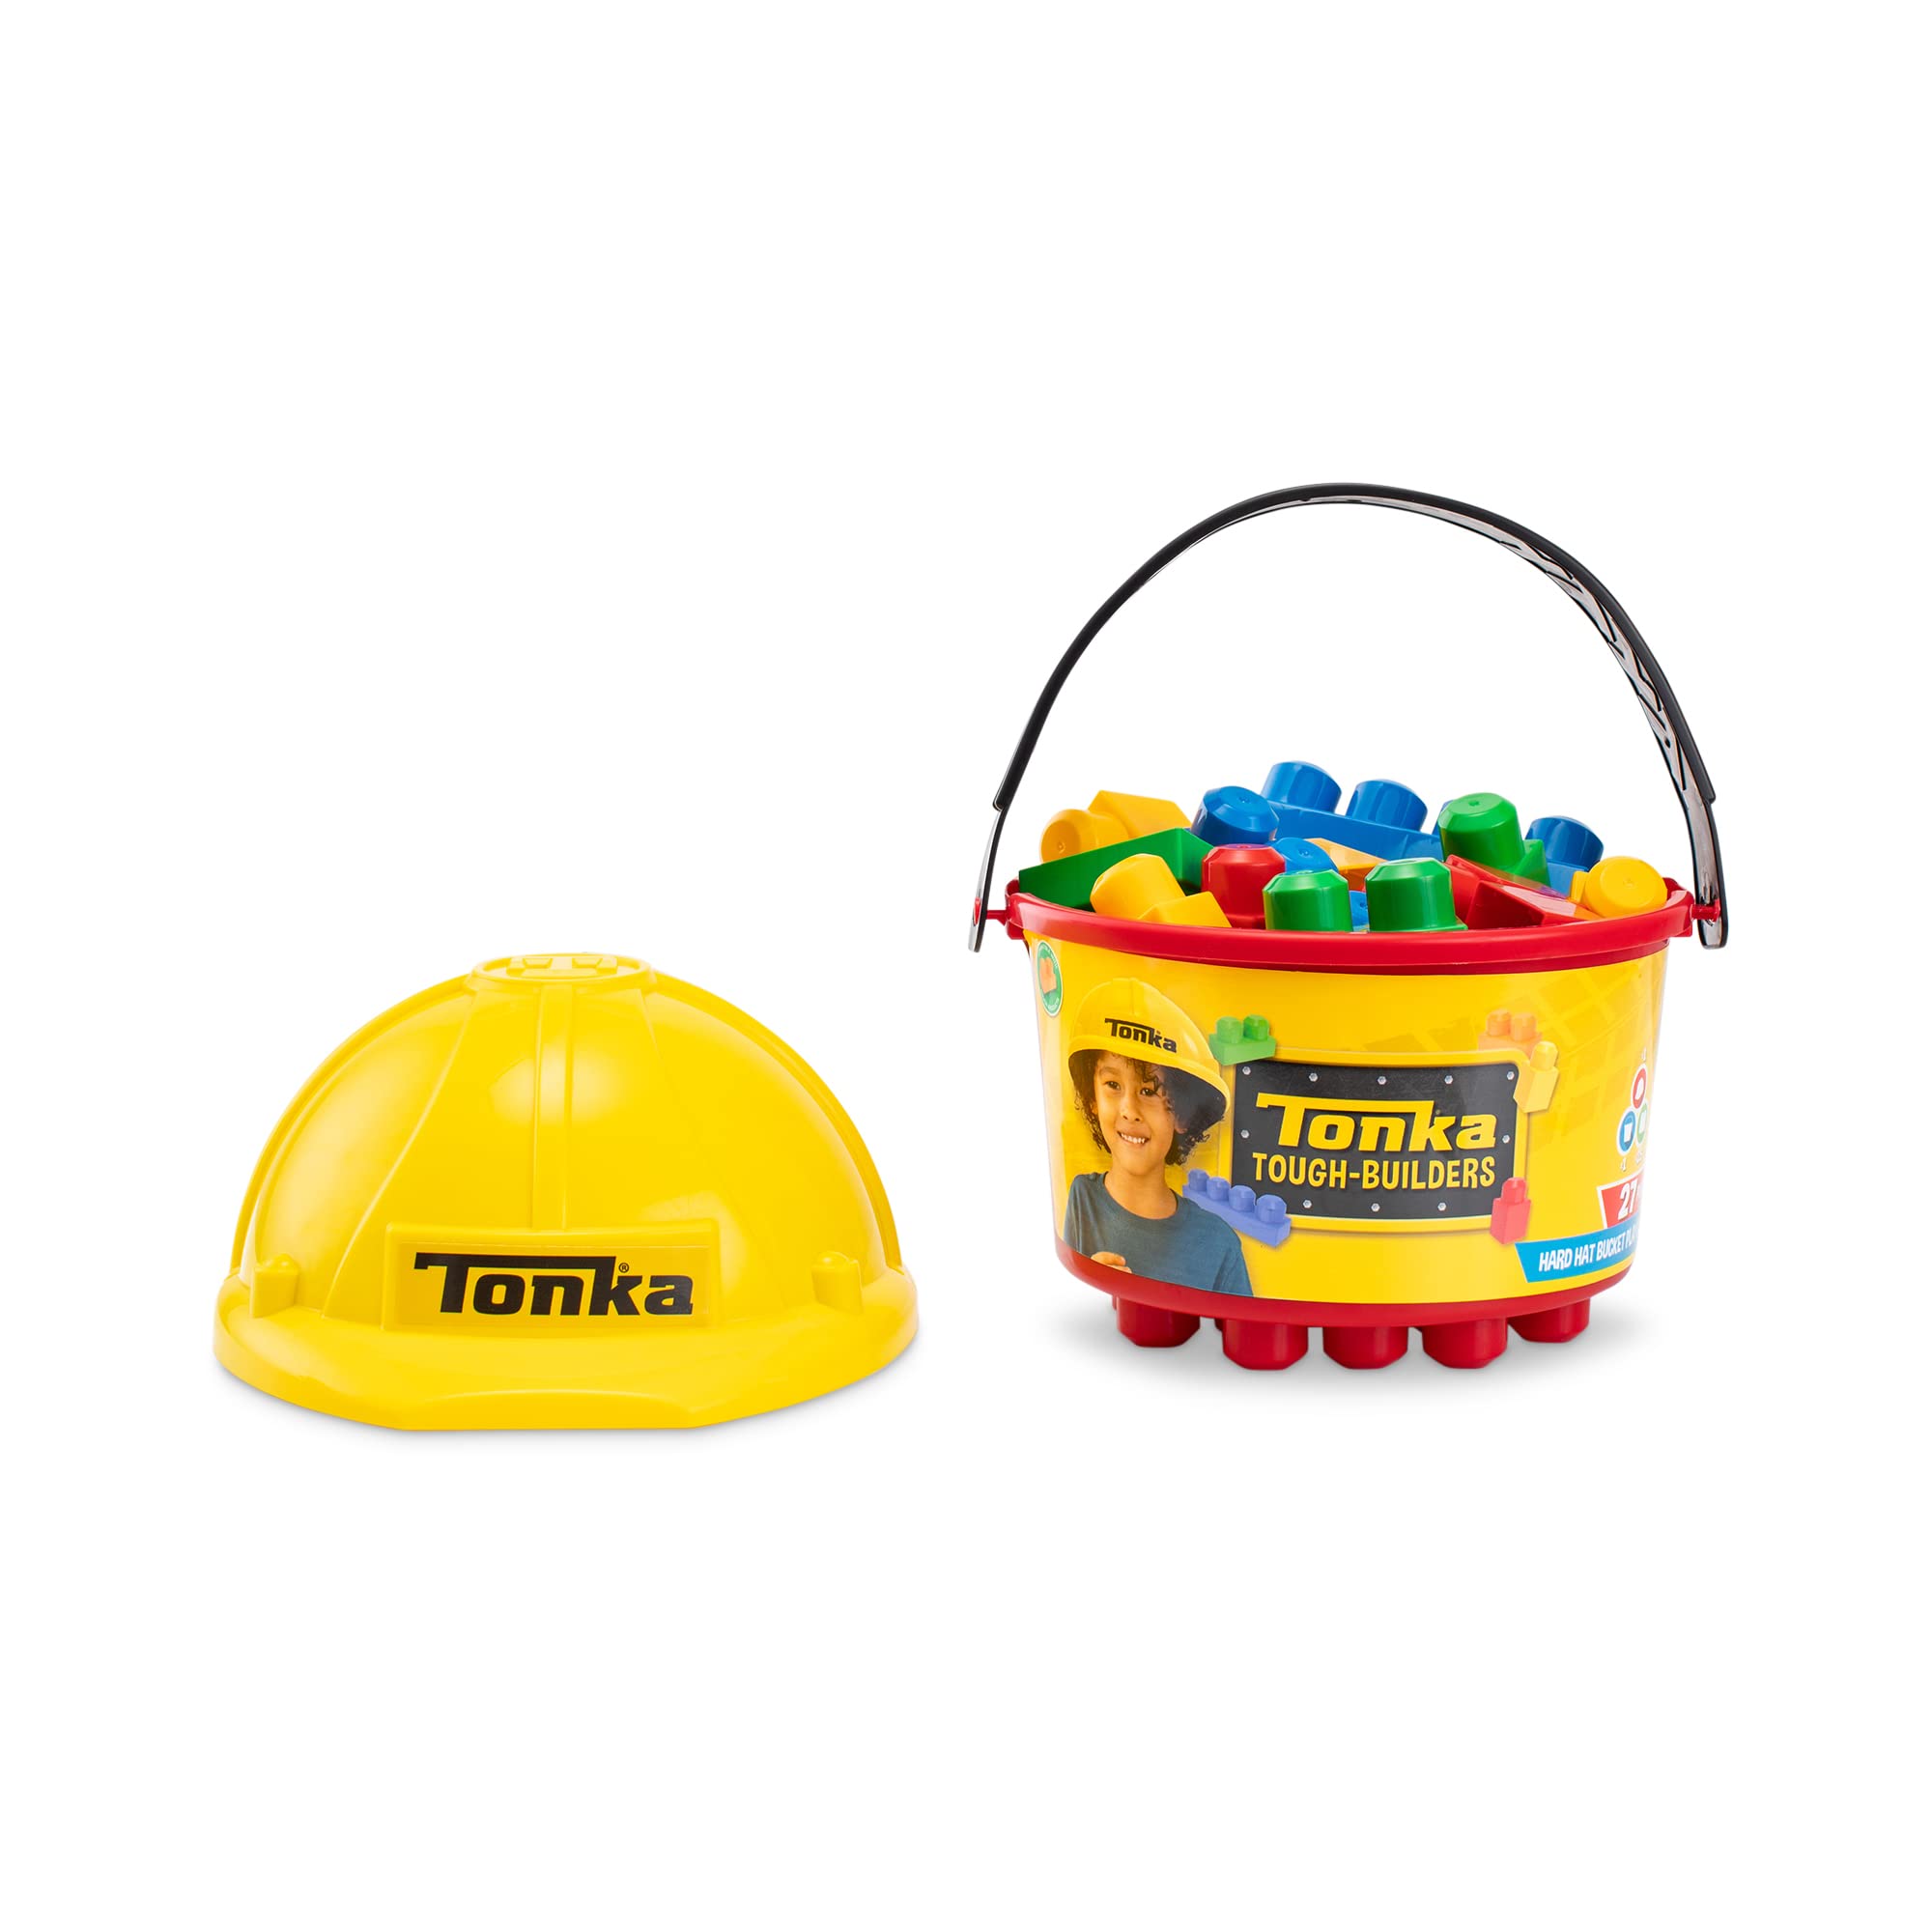 Tonka Tough Builders - Hard Hat & Large Size 25 Building Blocks and Bucket Playset, Educational Preschool Toy, Sensory, Travel Toy for Ages 1+, Great Summer Gift Indoor and Outdoor